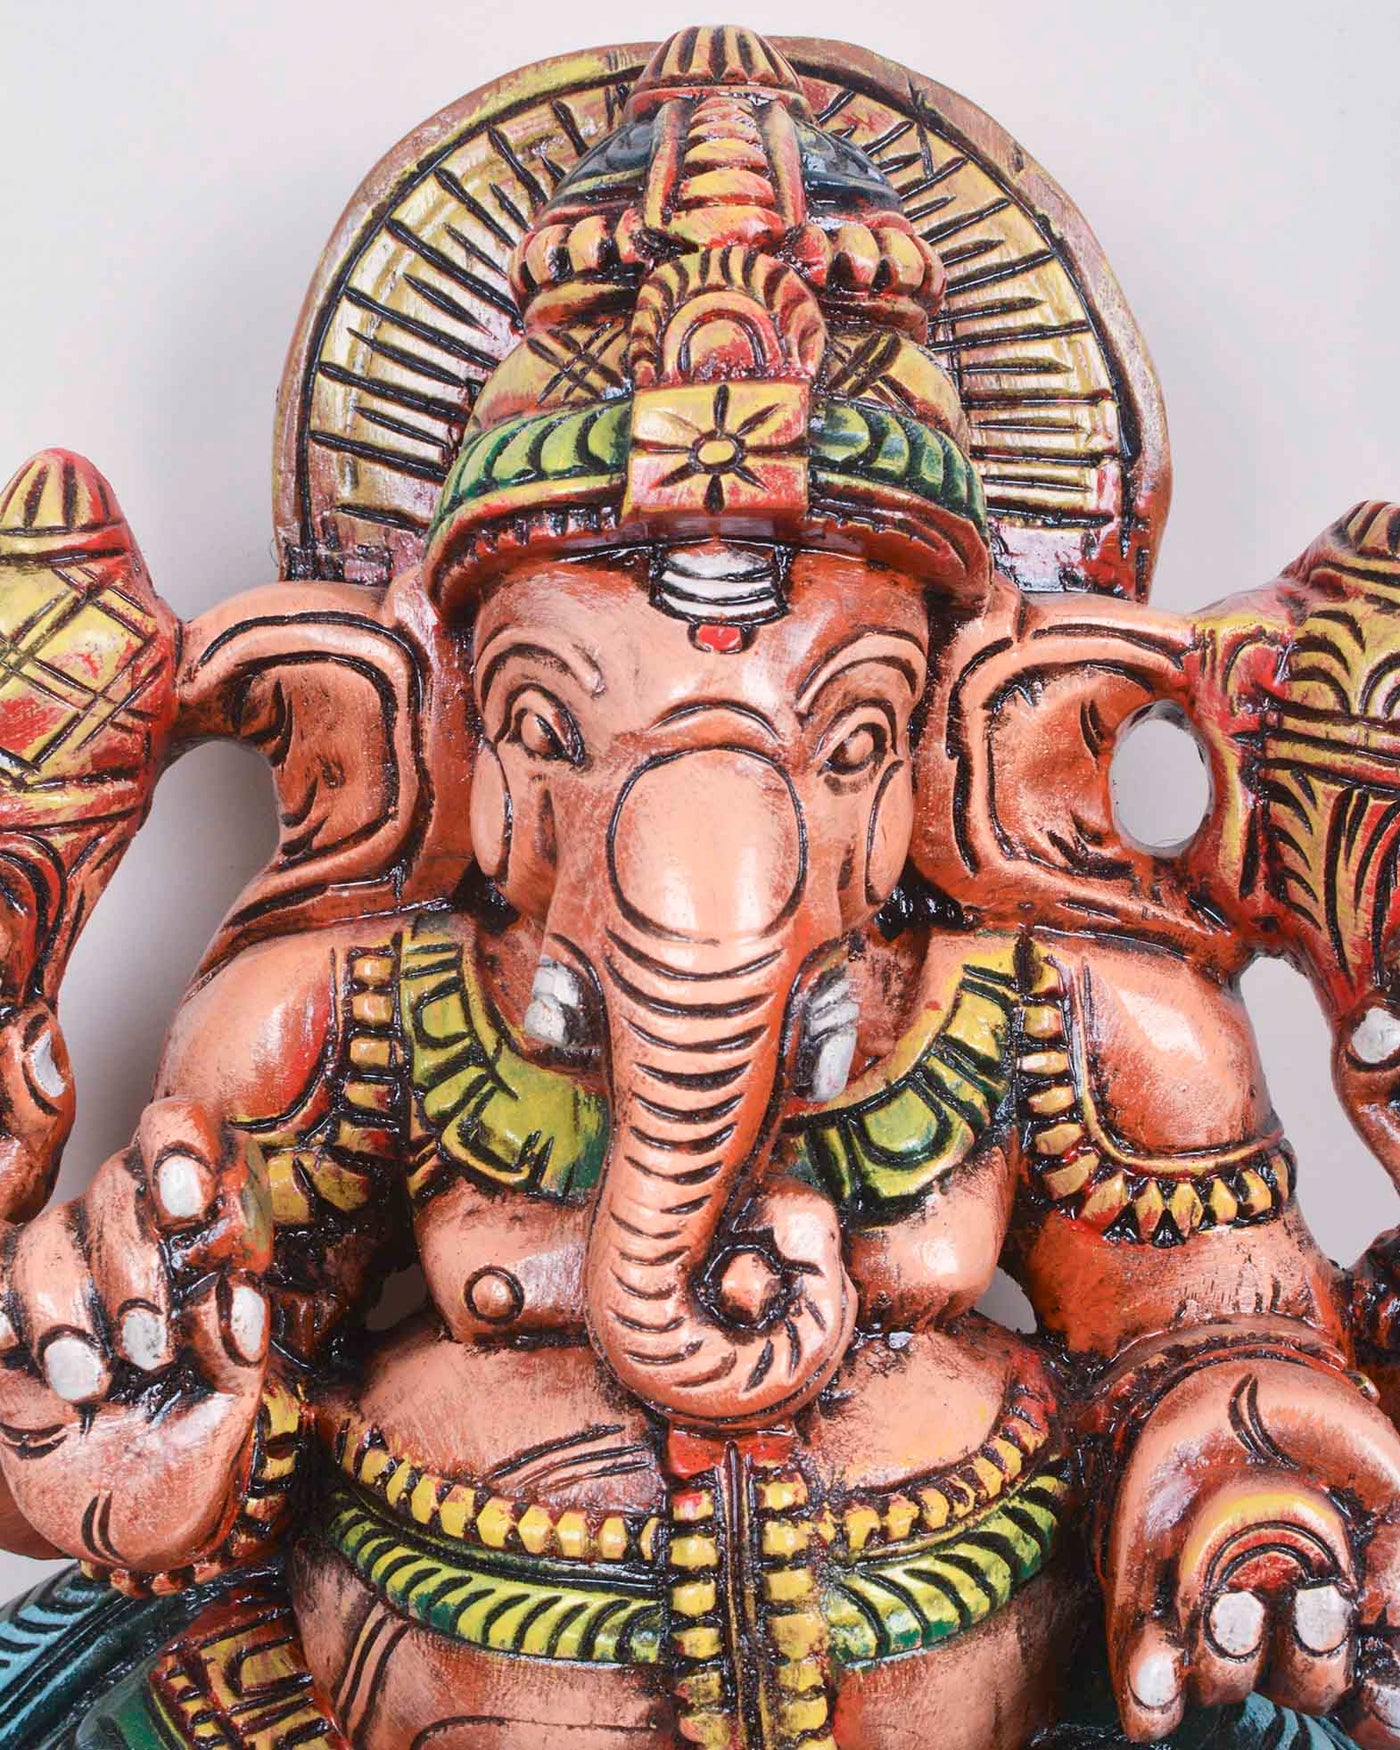 Decor For Home&Office Colourful Ganesha Sculpture 23"